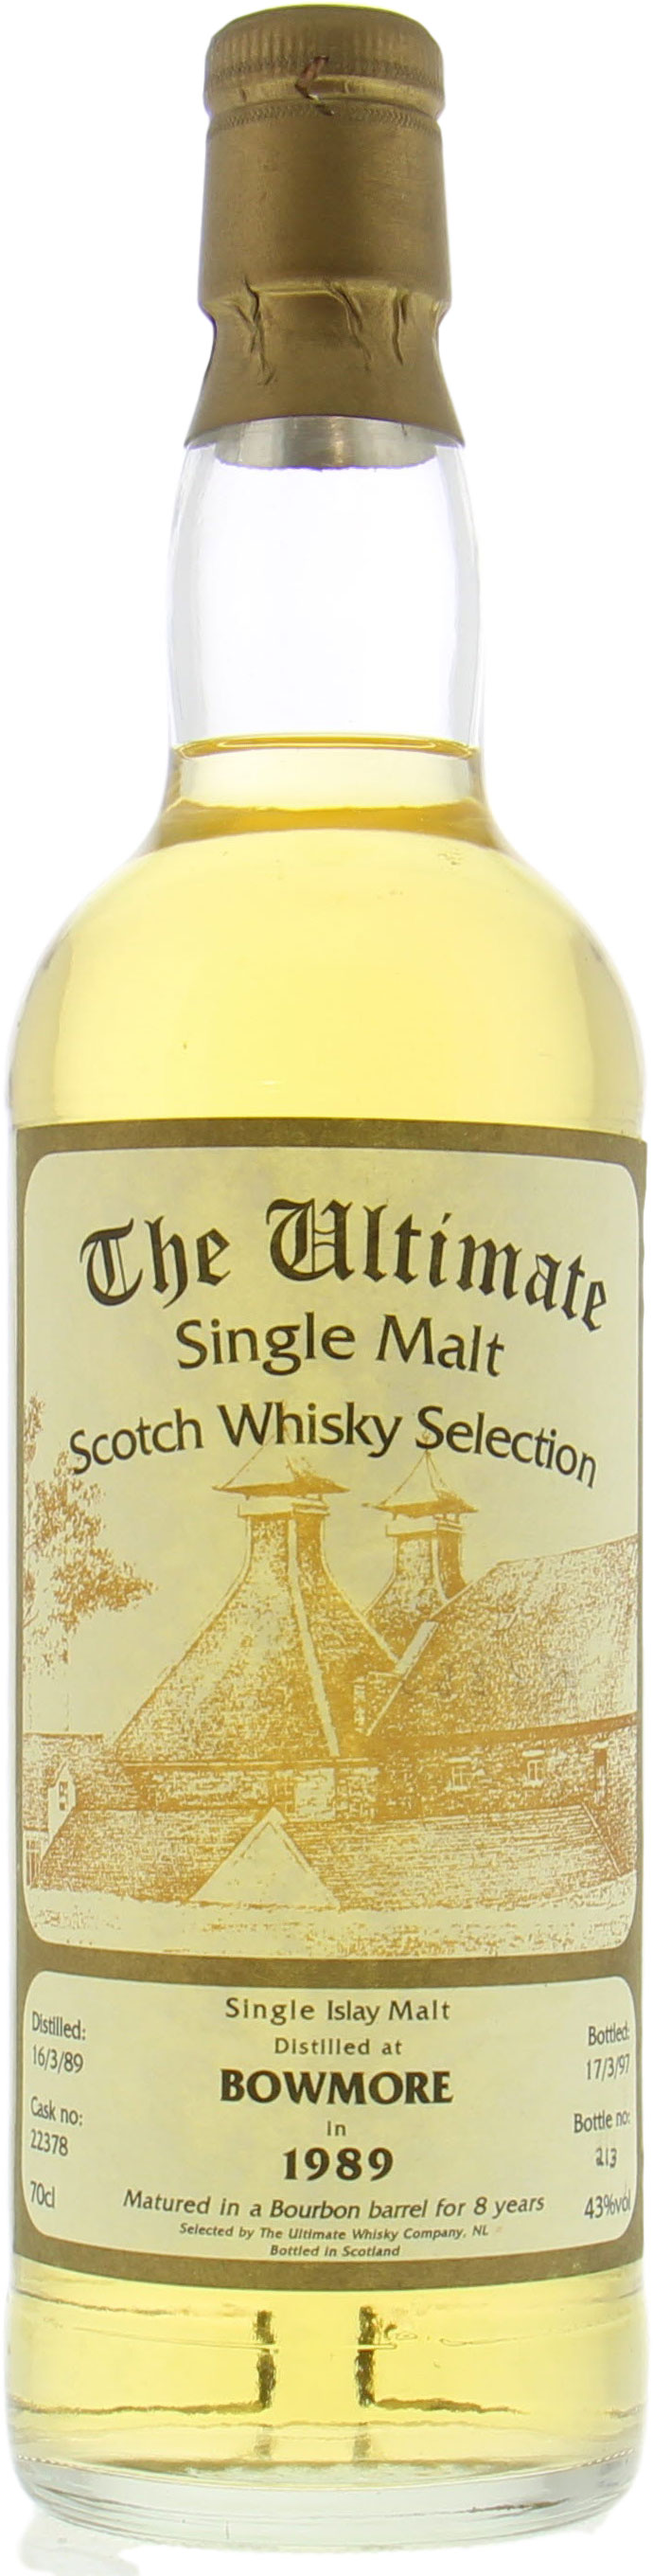 Bowmore - 1989 The Ultimate Cask 22378 43% 1989 Perfect